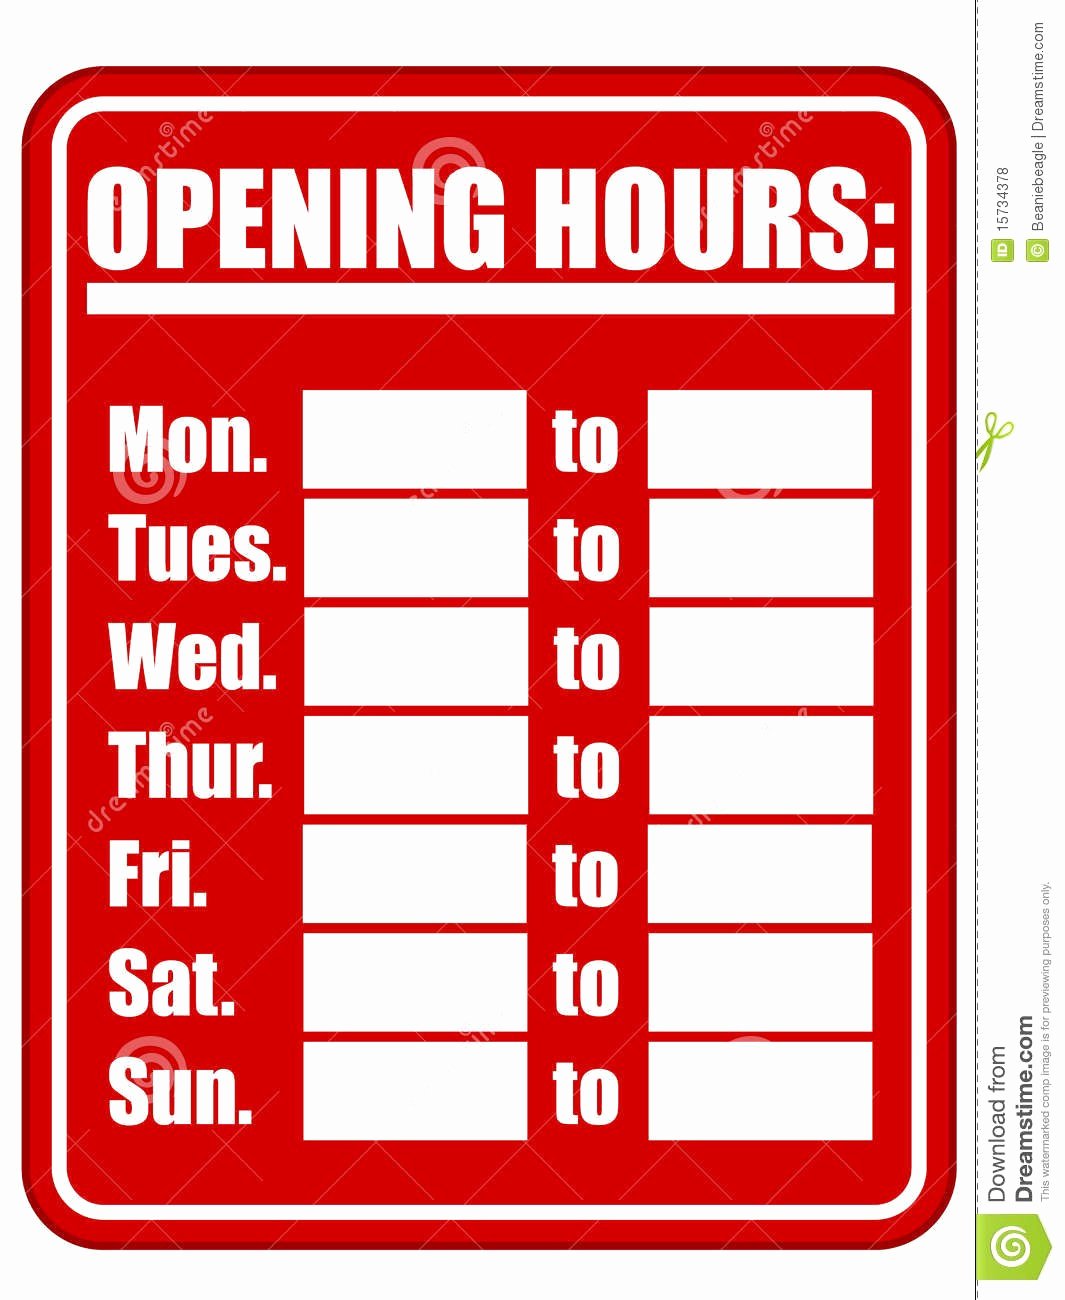 Printable Business Hours Sign Lovely Printable Business Hours Sign Template Tulsalutheran